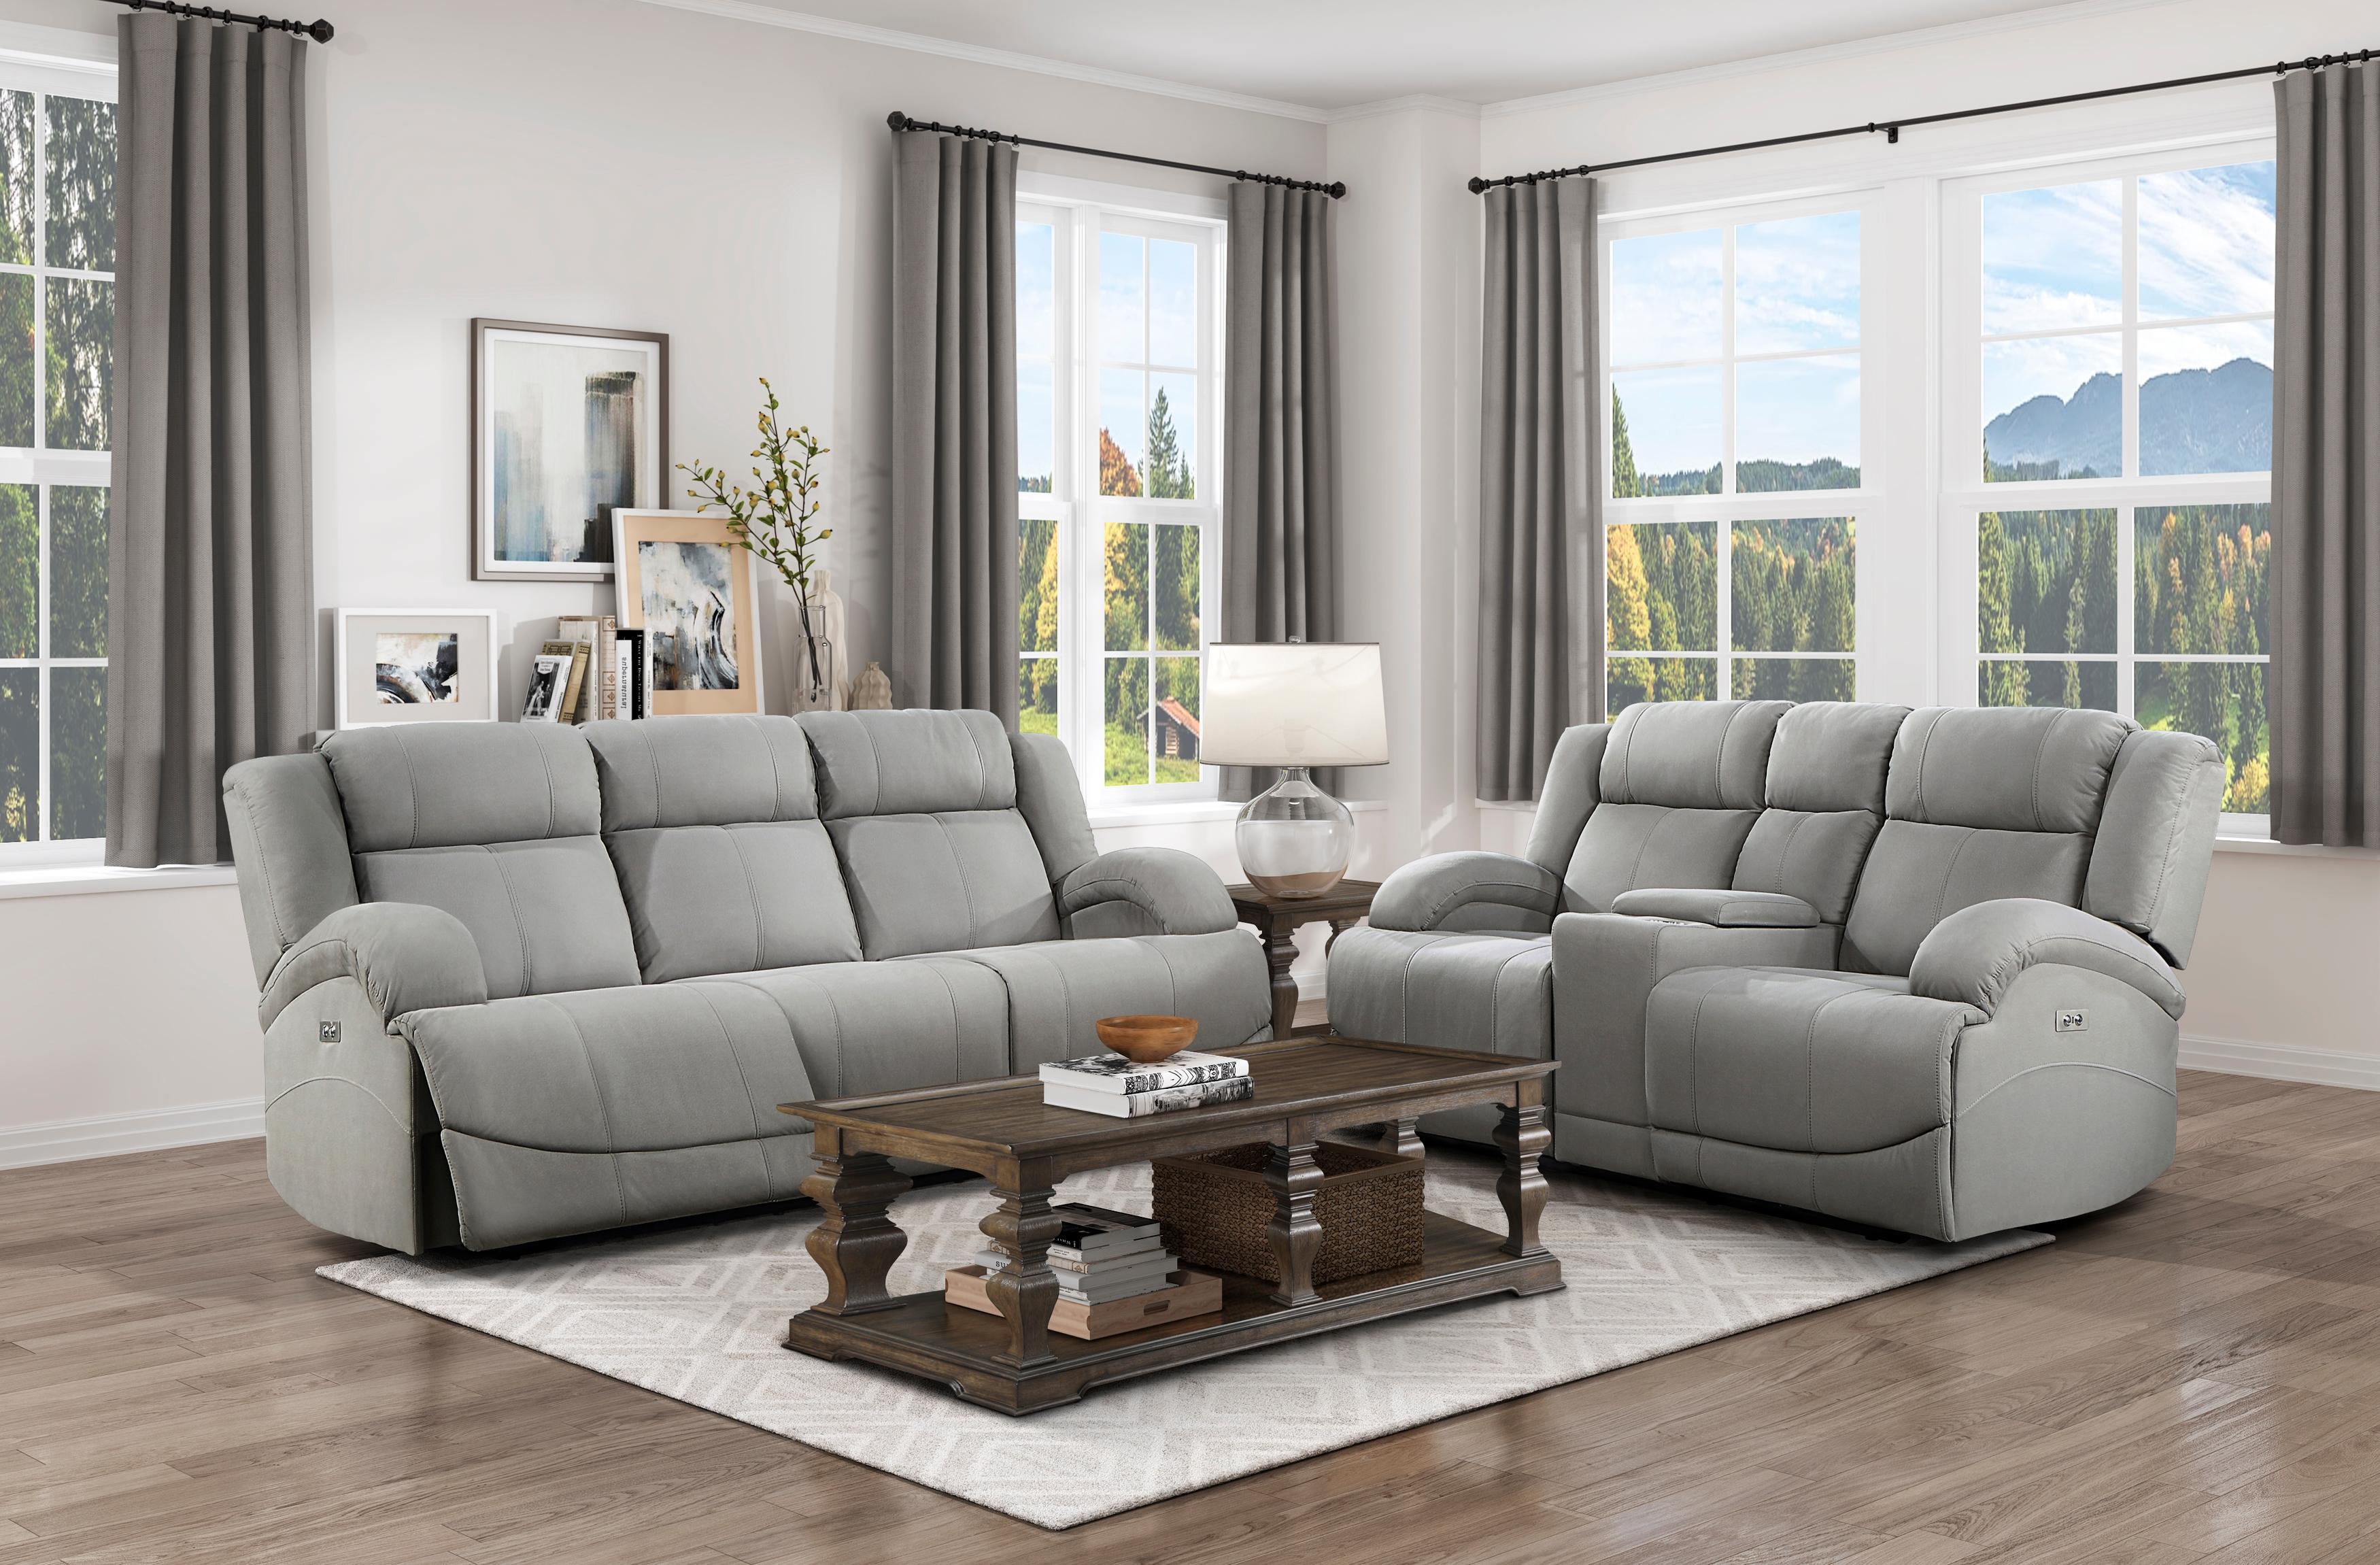 Transitional Power Reclining Set 9207GRY-PW-2PC Camryn 9207GRY-PW-2PC in Gray Microfiber